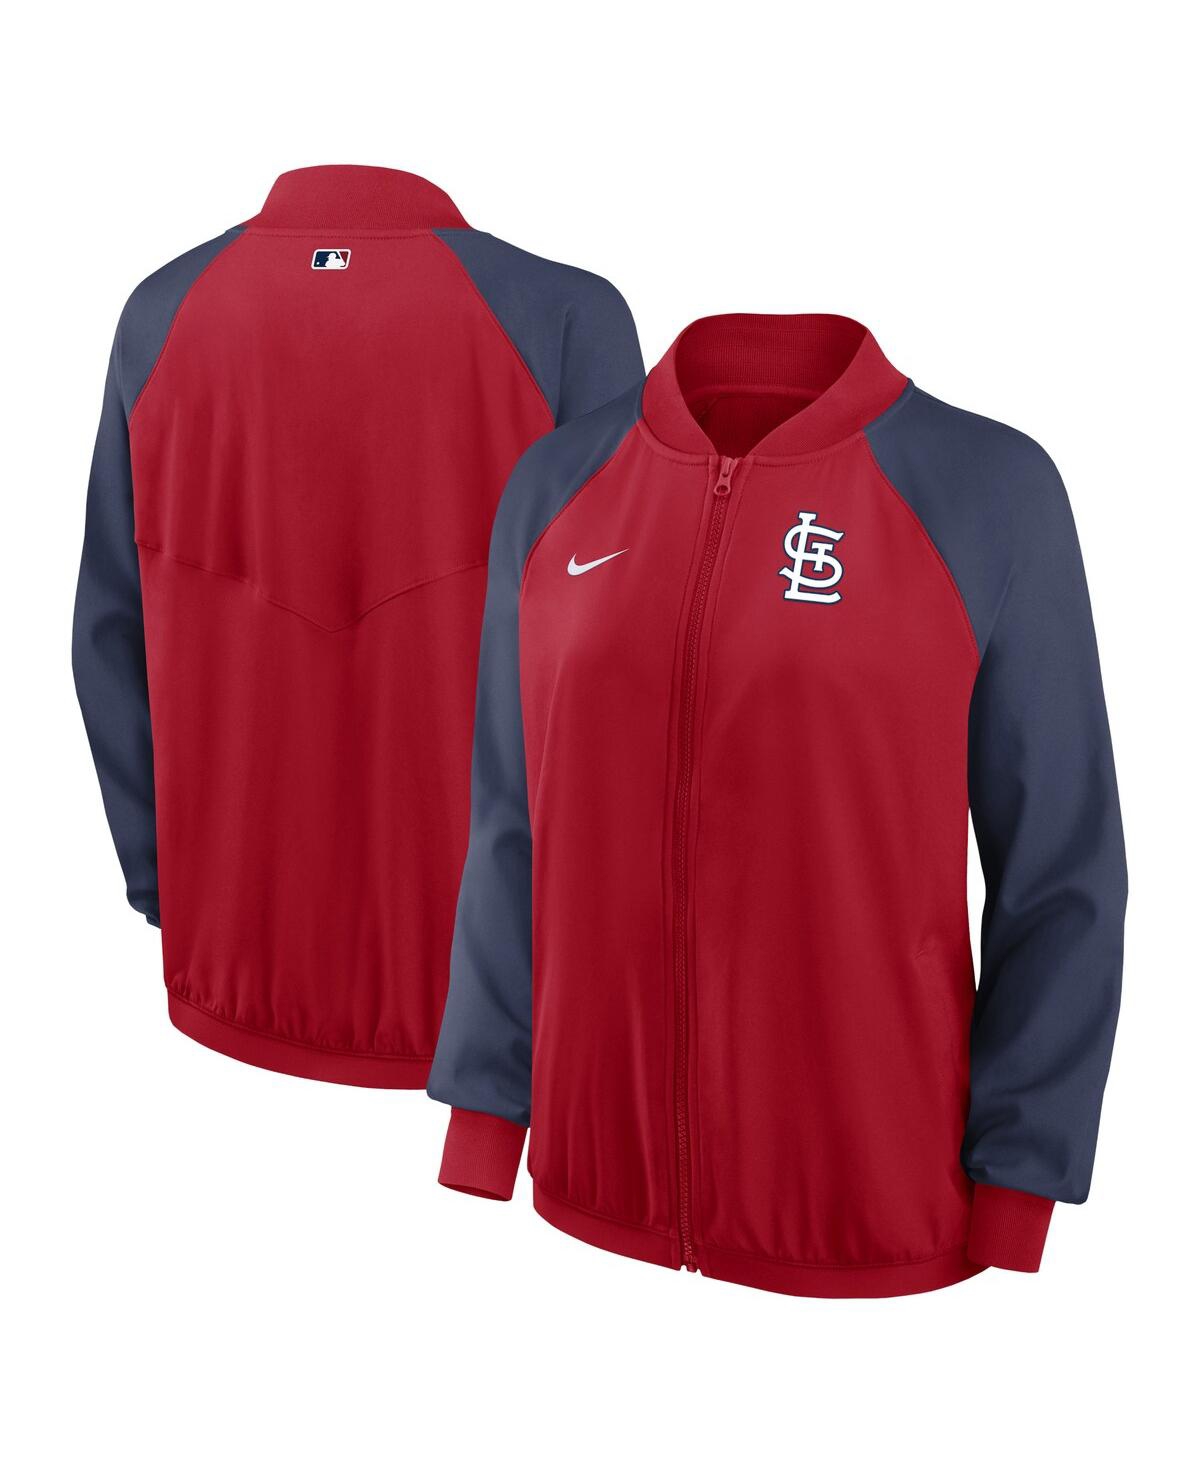 Shop Nike Women's  Red St. Louis Cardinals Authentic Collection Team Raglan Performance Full-zip Jacket